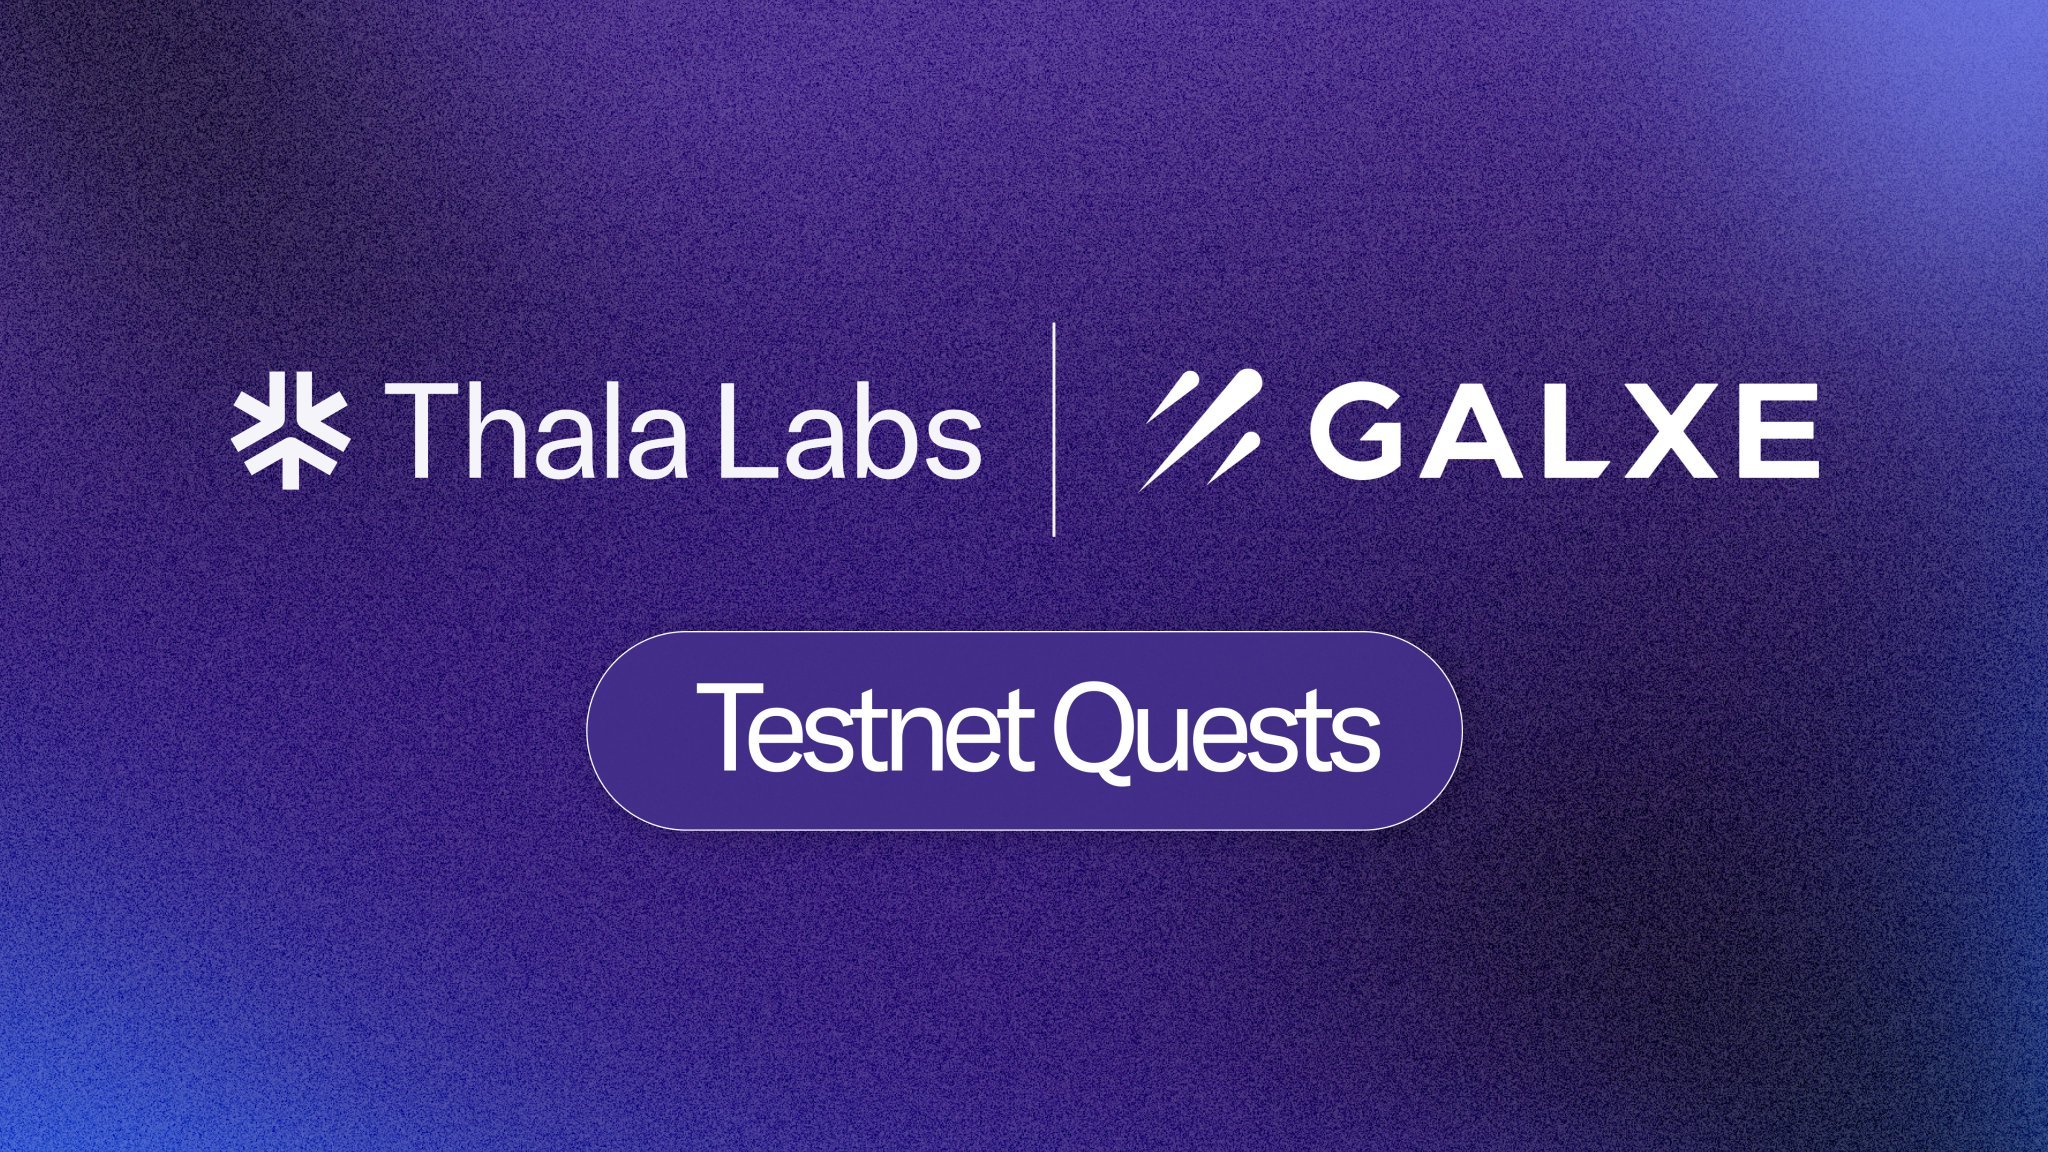 Thala on X: Join our AMA with @Galxe as our co-founders San and